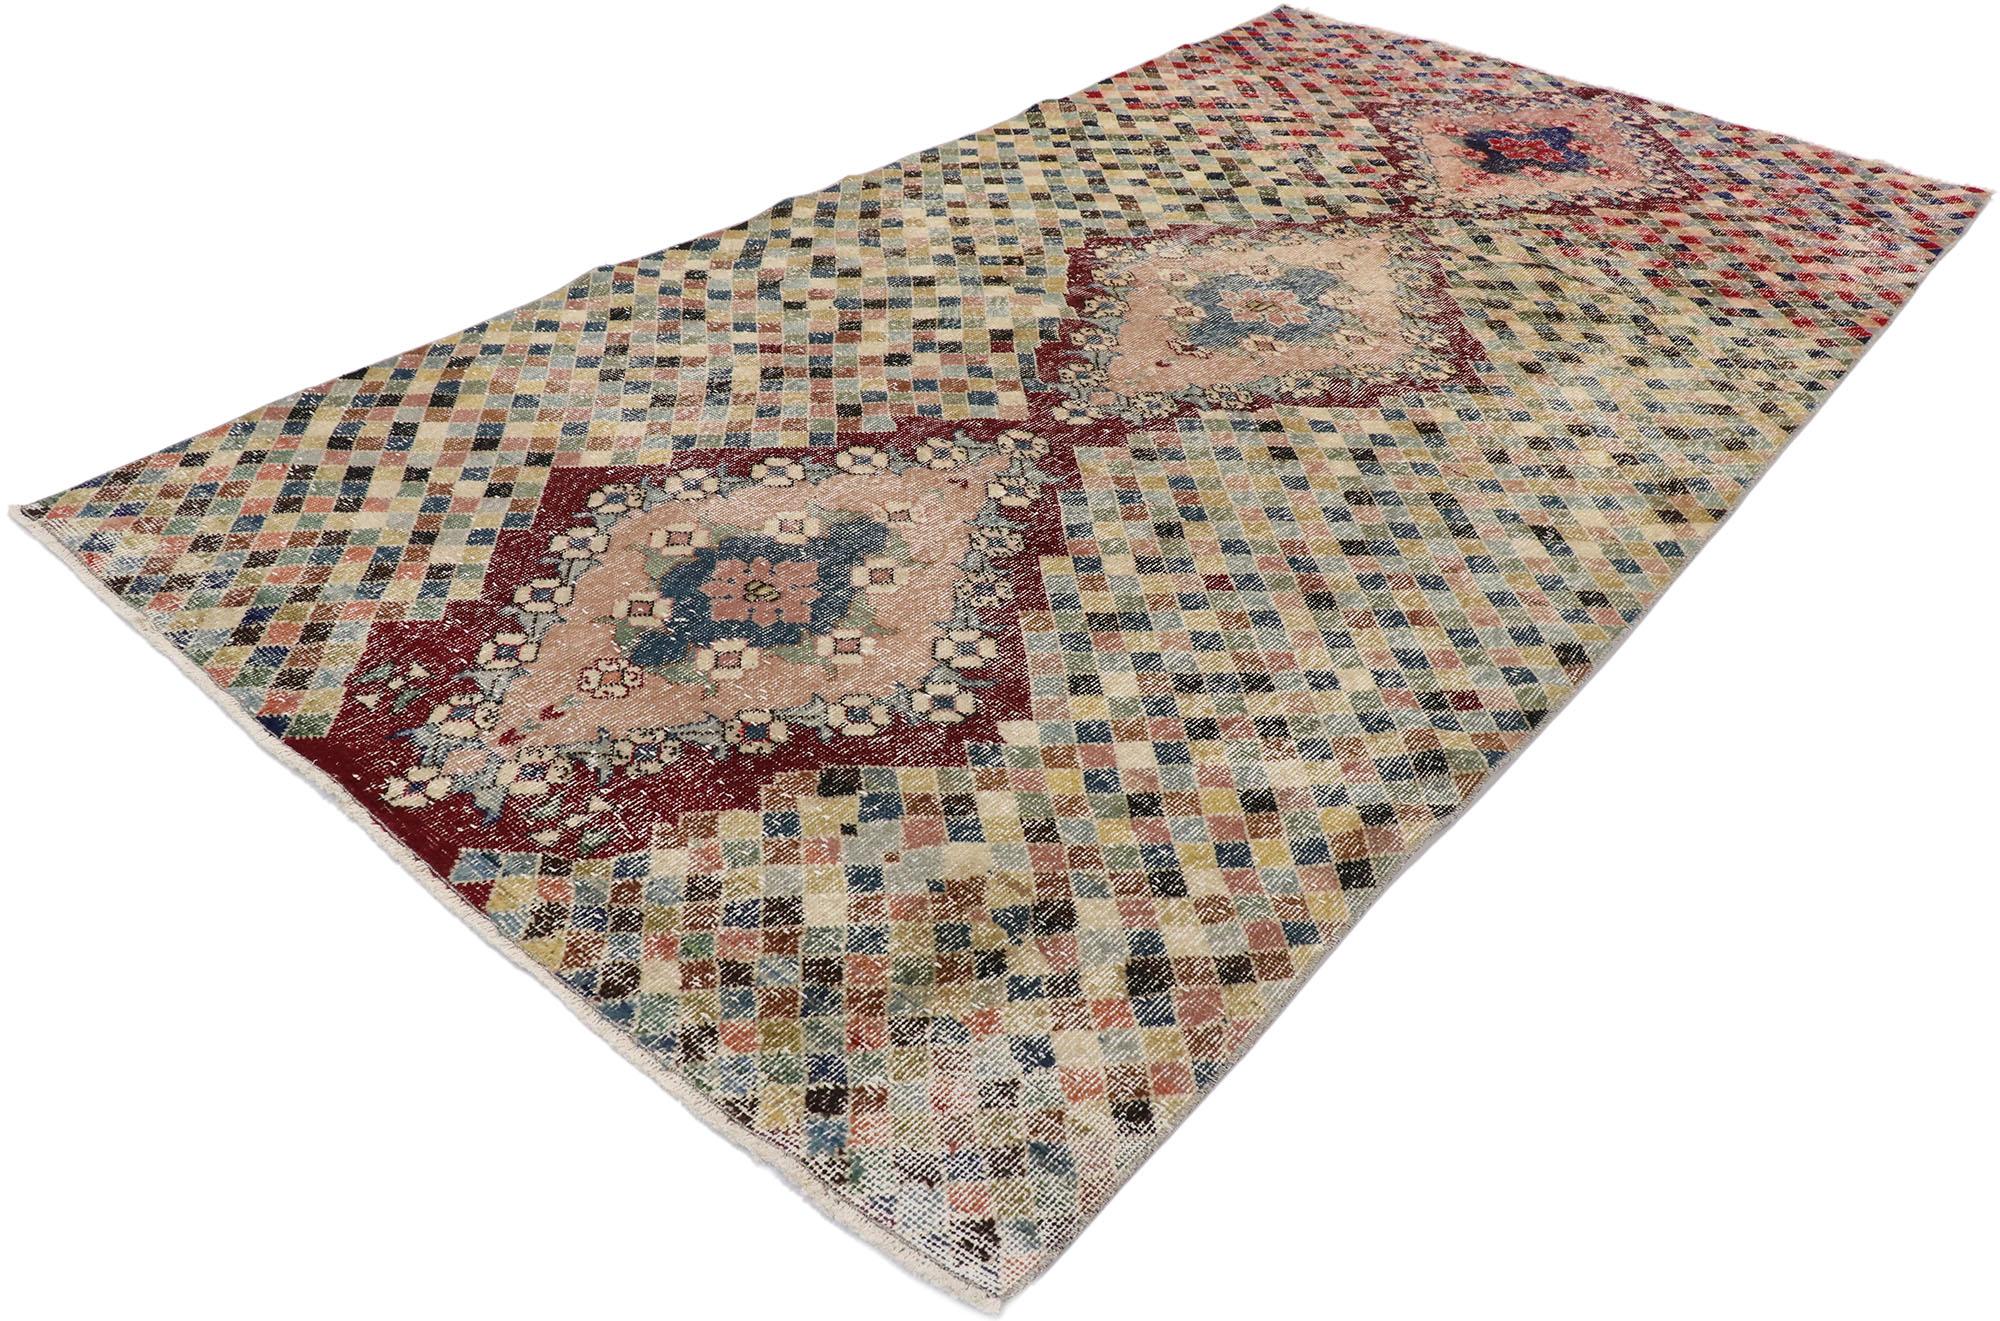 53336, distressed vintage Turkish Sivas rug with Romantic Cubist style. This hand knotted wool distressed vintage Turkish Sivas rug features three diamond-shaped medallions overlaid upon an all-over checkered backdrop. Each medallion is comprised of